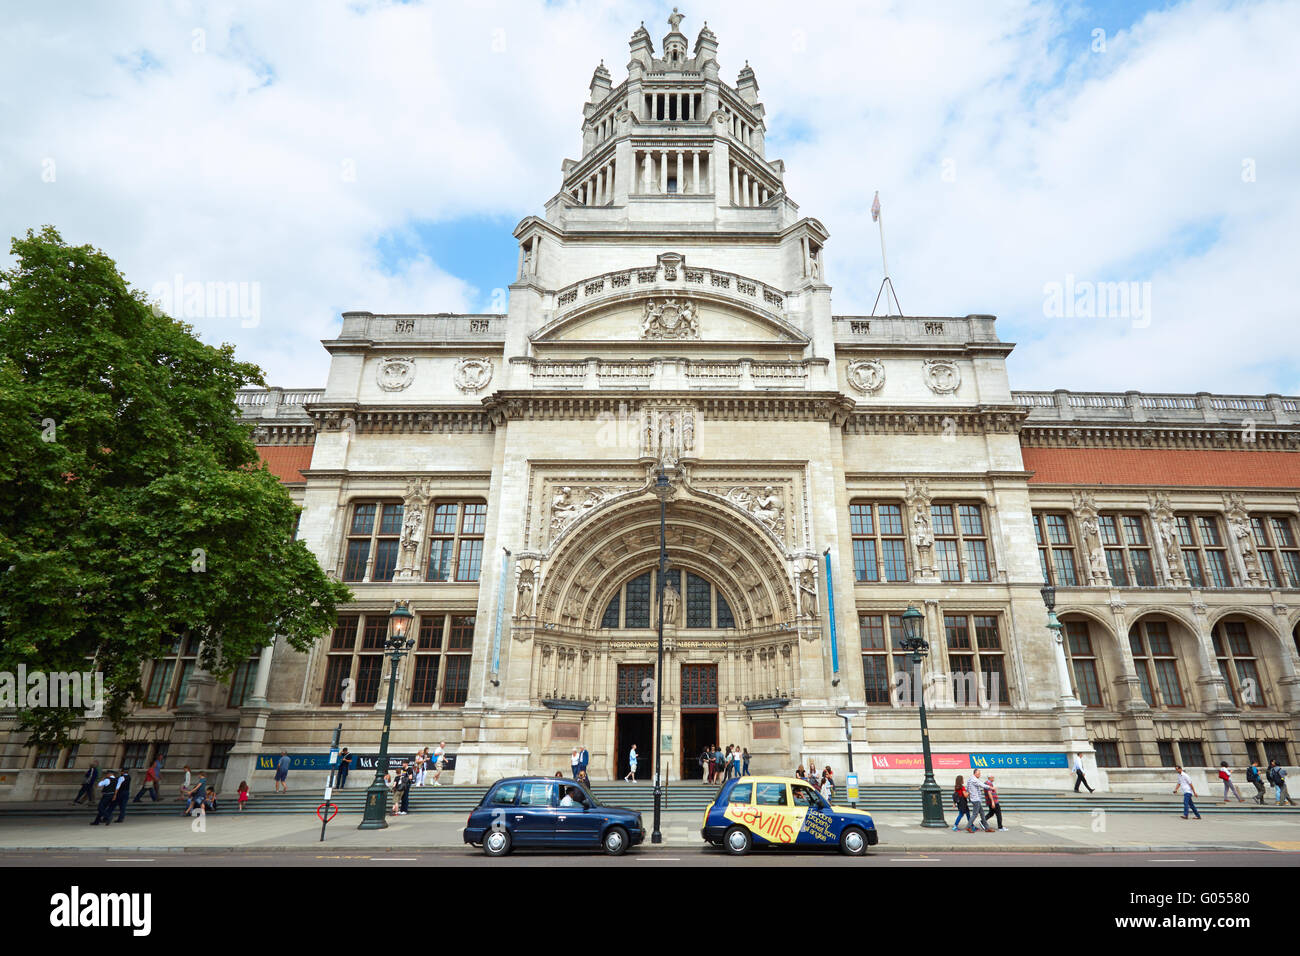 Victoria and Albert museum facade with people walking in London, UK Stock Photo